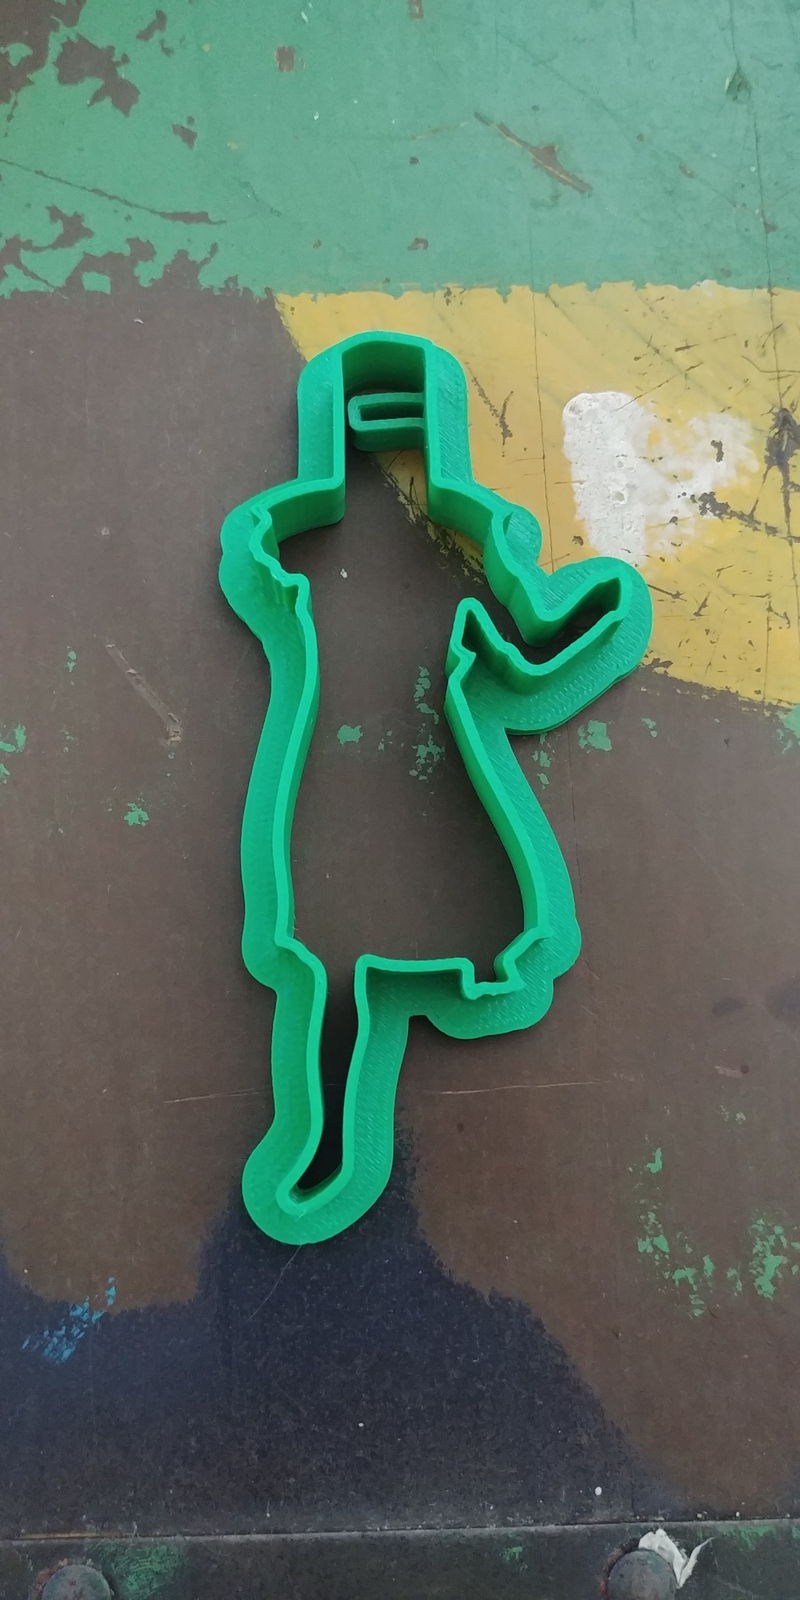 3D Printed Cookie Cutter Inspired by Gremlins Gizmo in Santa Hat 